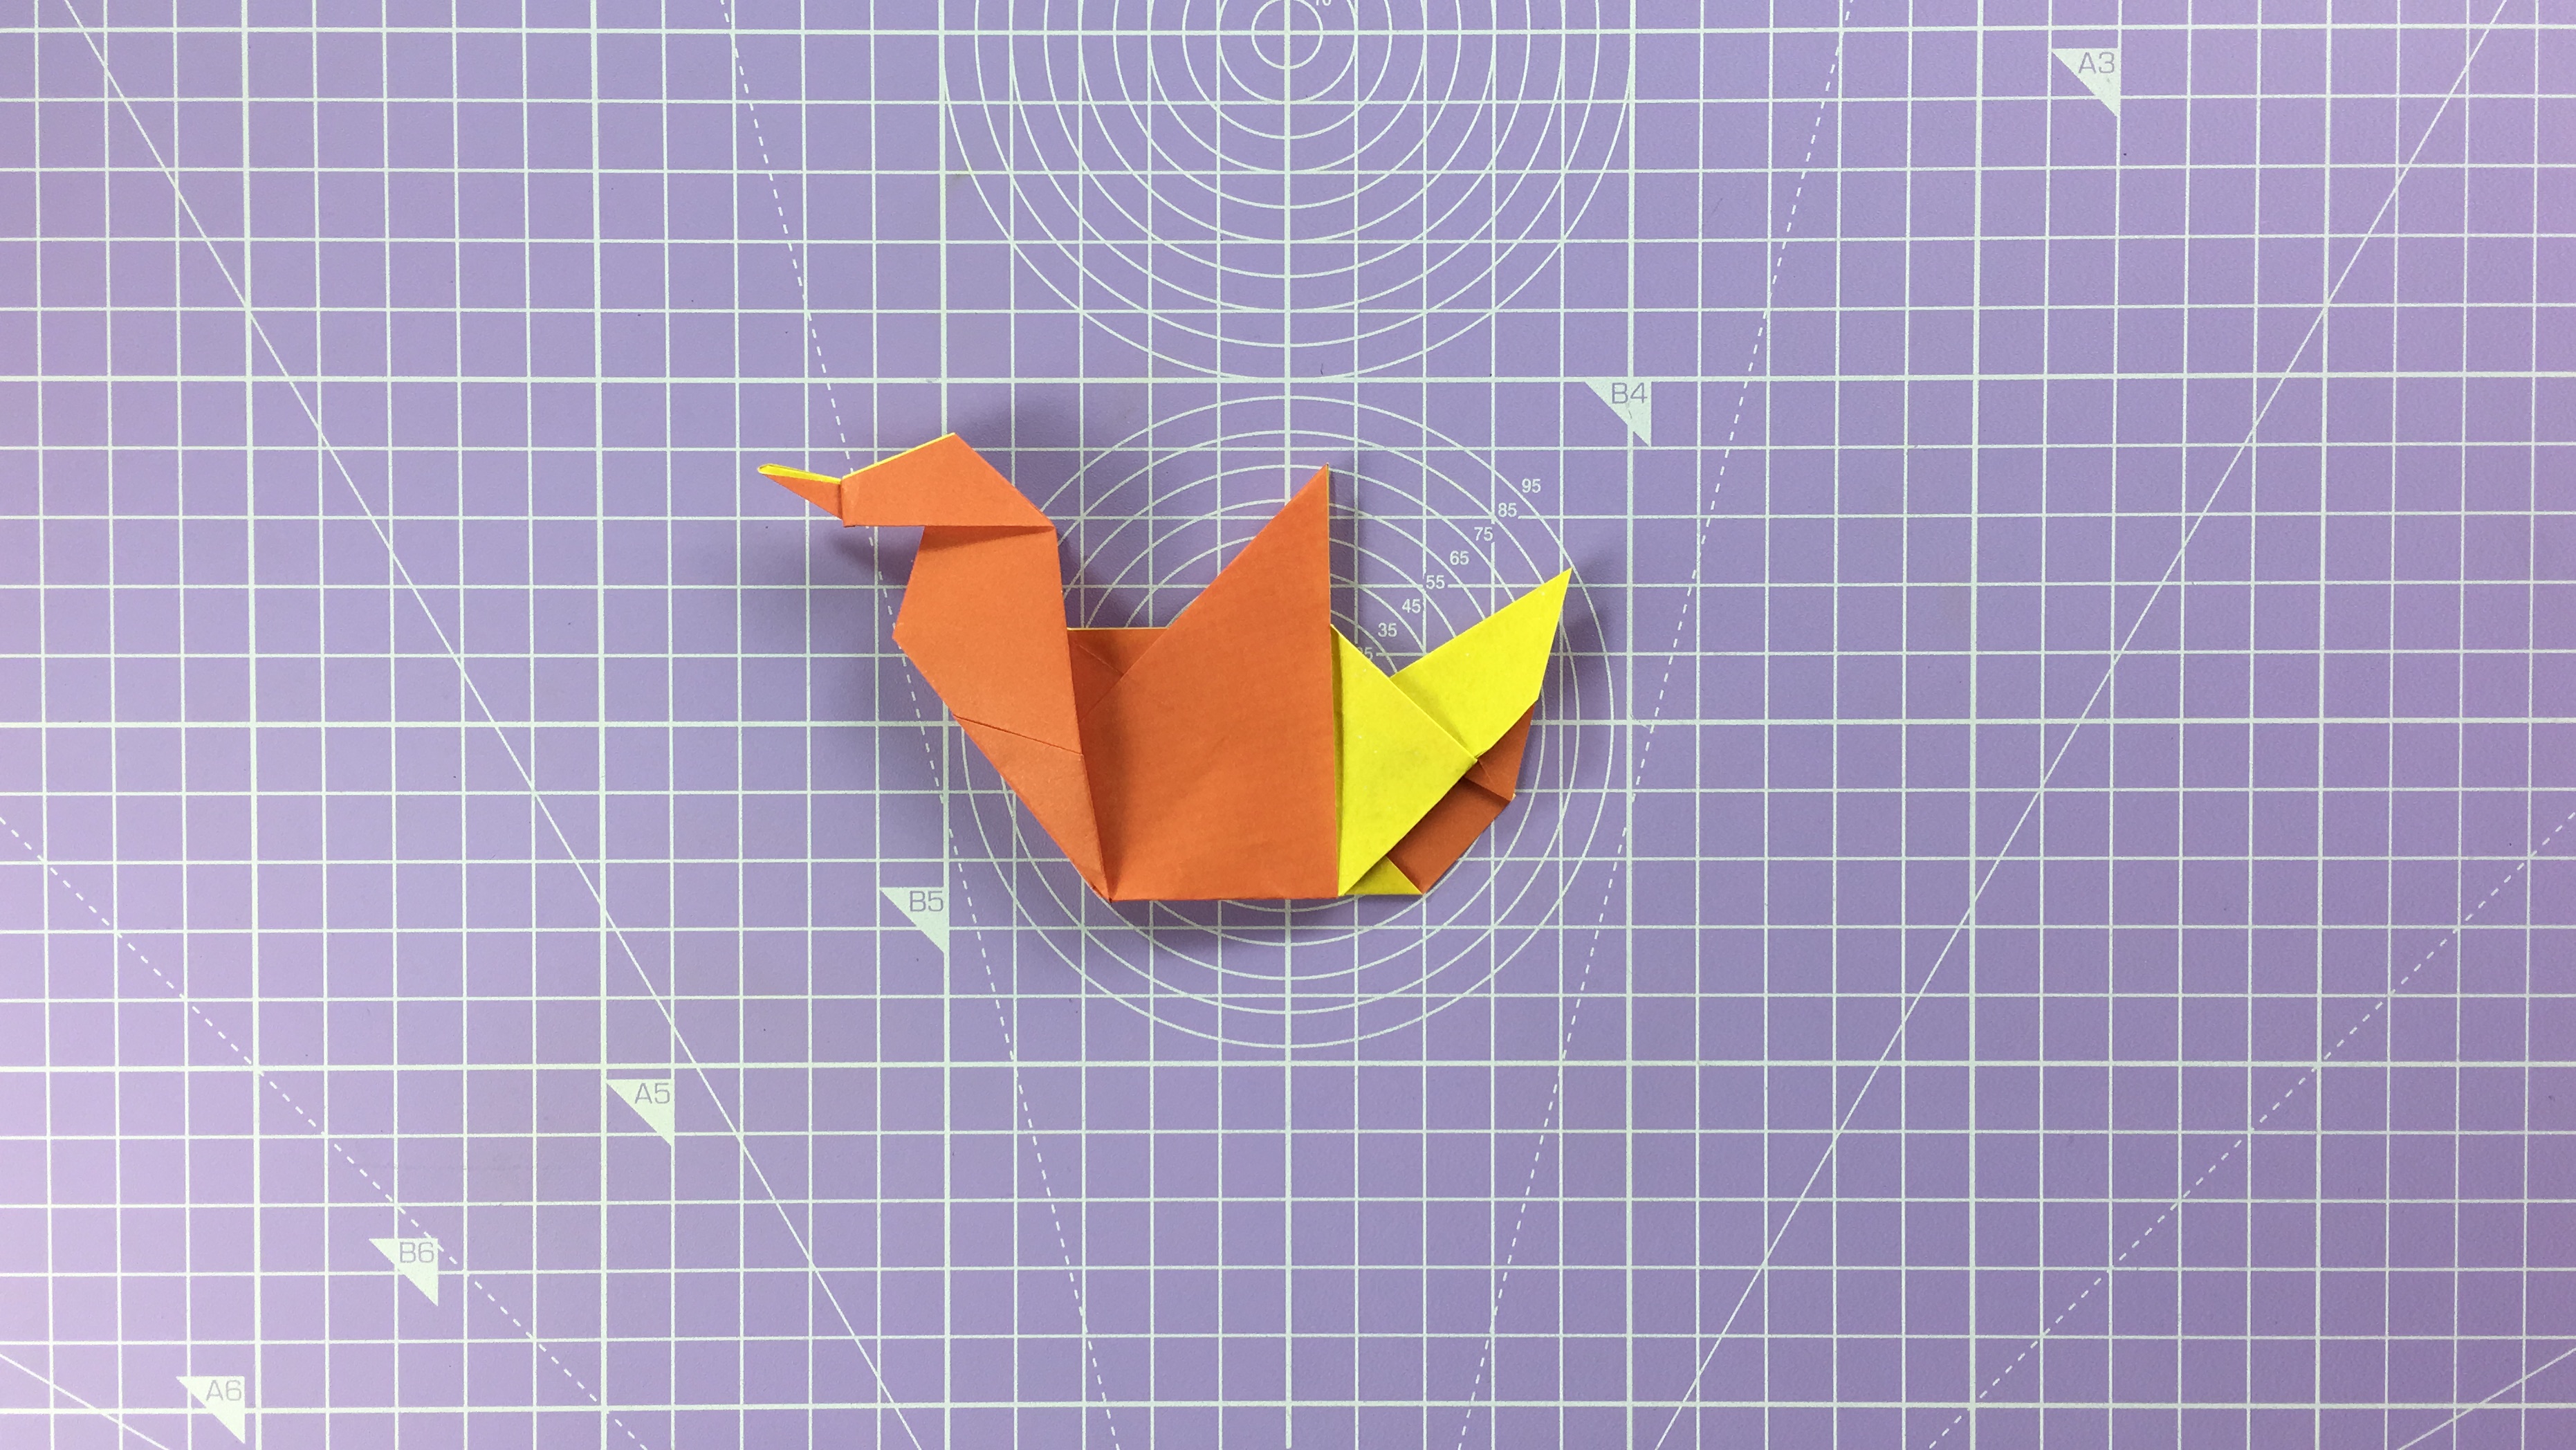 How to make an origami duck - step 21a